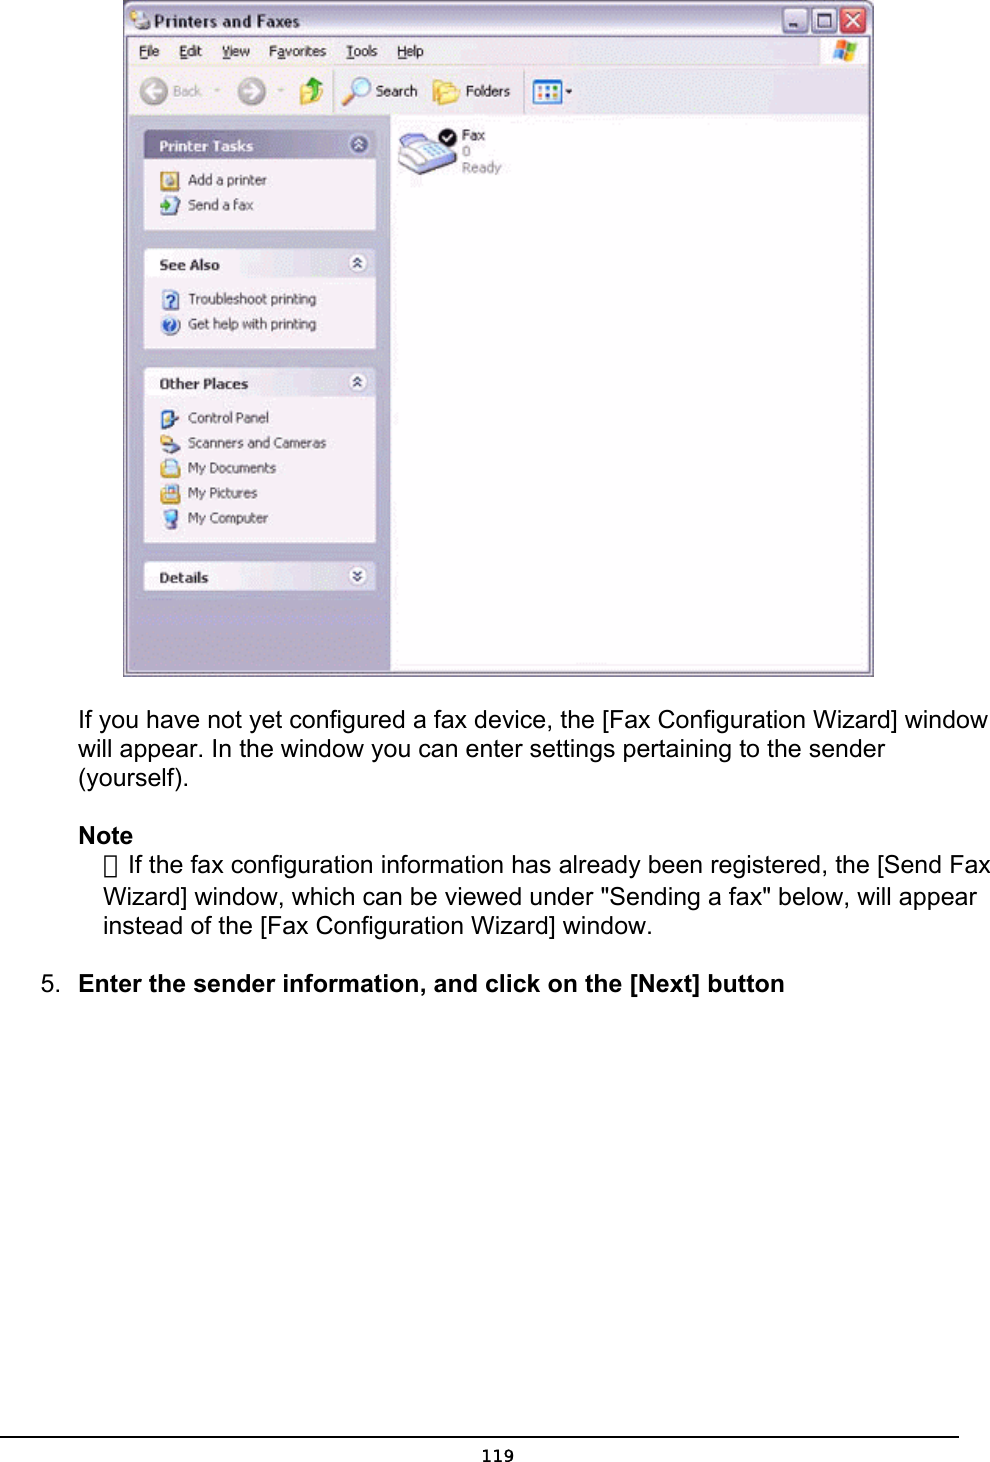         If you have not yet configured a fax device, the [Fax Configuration Wizard] window       will appear. In the window you can enter settings pertaining to the sender                 (yourself).  Note  ．If the fax configuration information has already been registered, the [Send Fax   Wizard] window, which can be viewed under &quot;Sending a fax&quot; below, will appear   instead of the [Fax Configuration Wizard] window.   5.  Enter the sender information, and click on the [Next] button  119